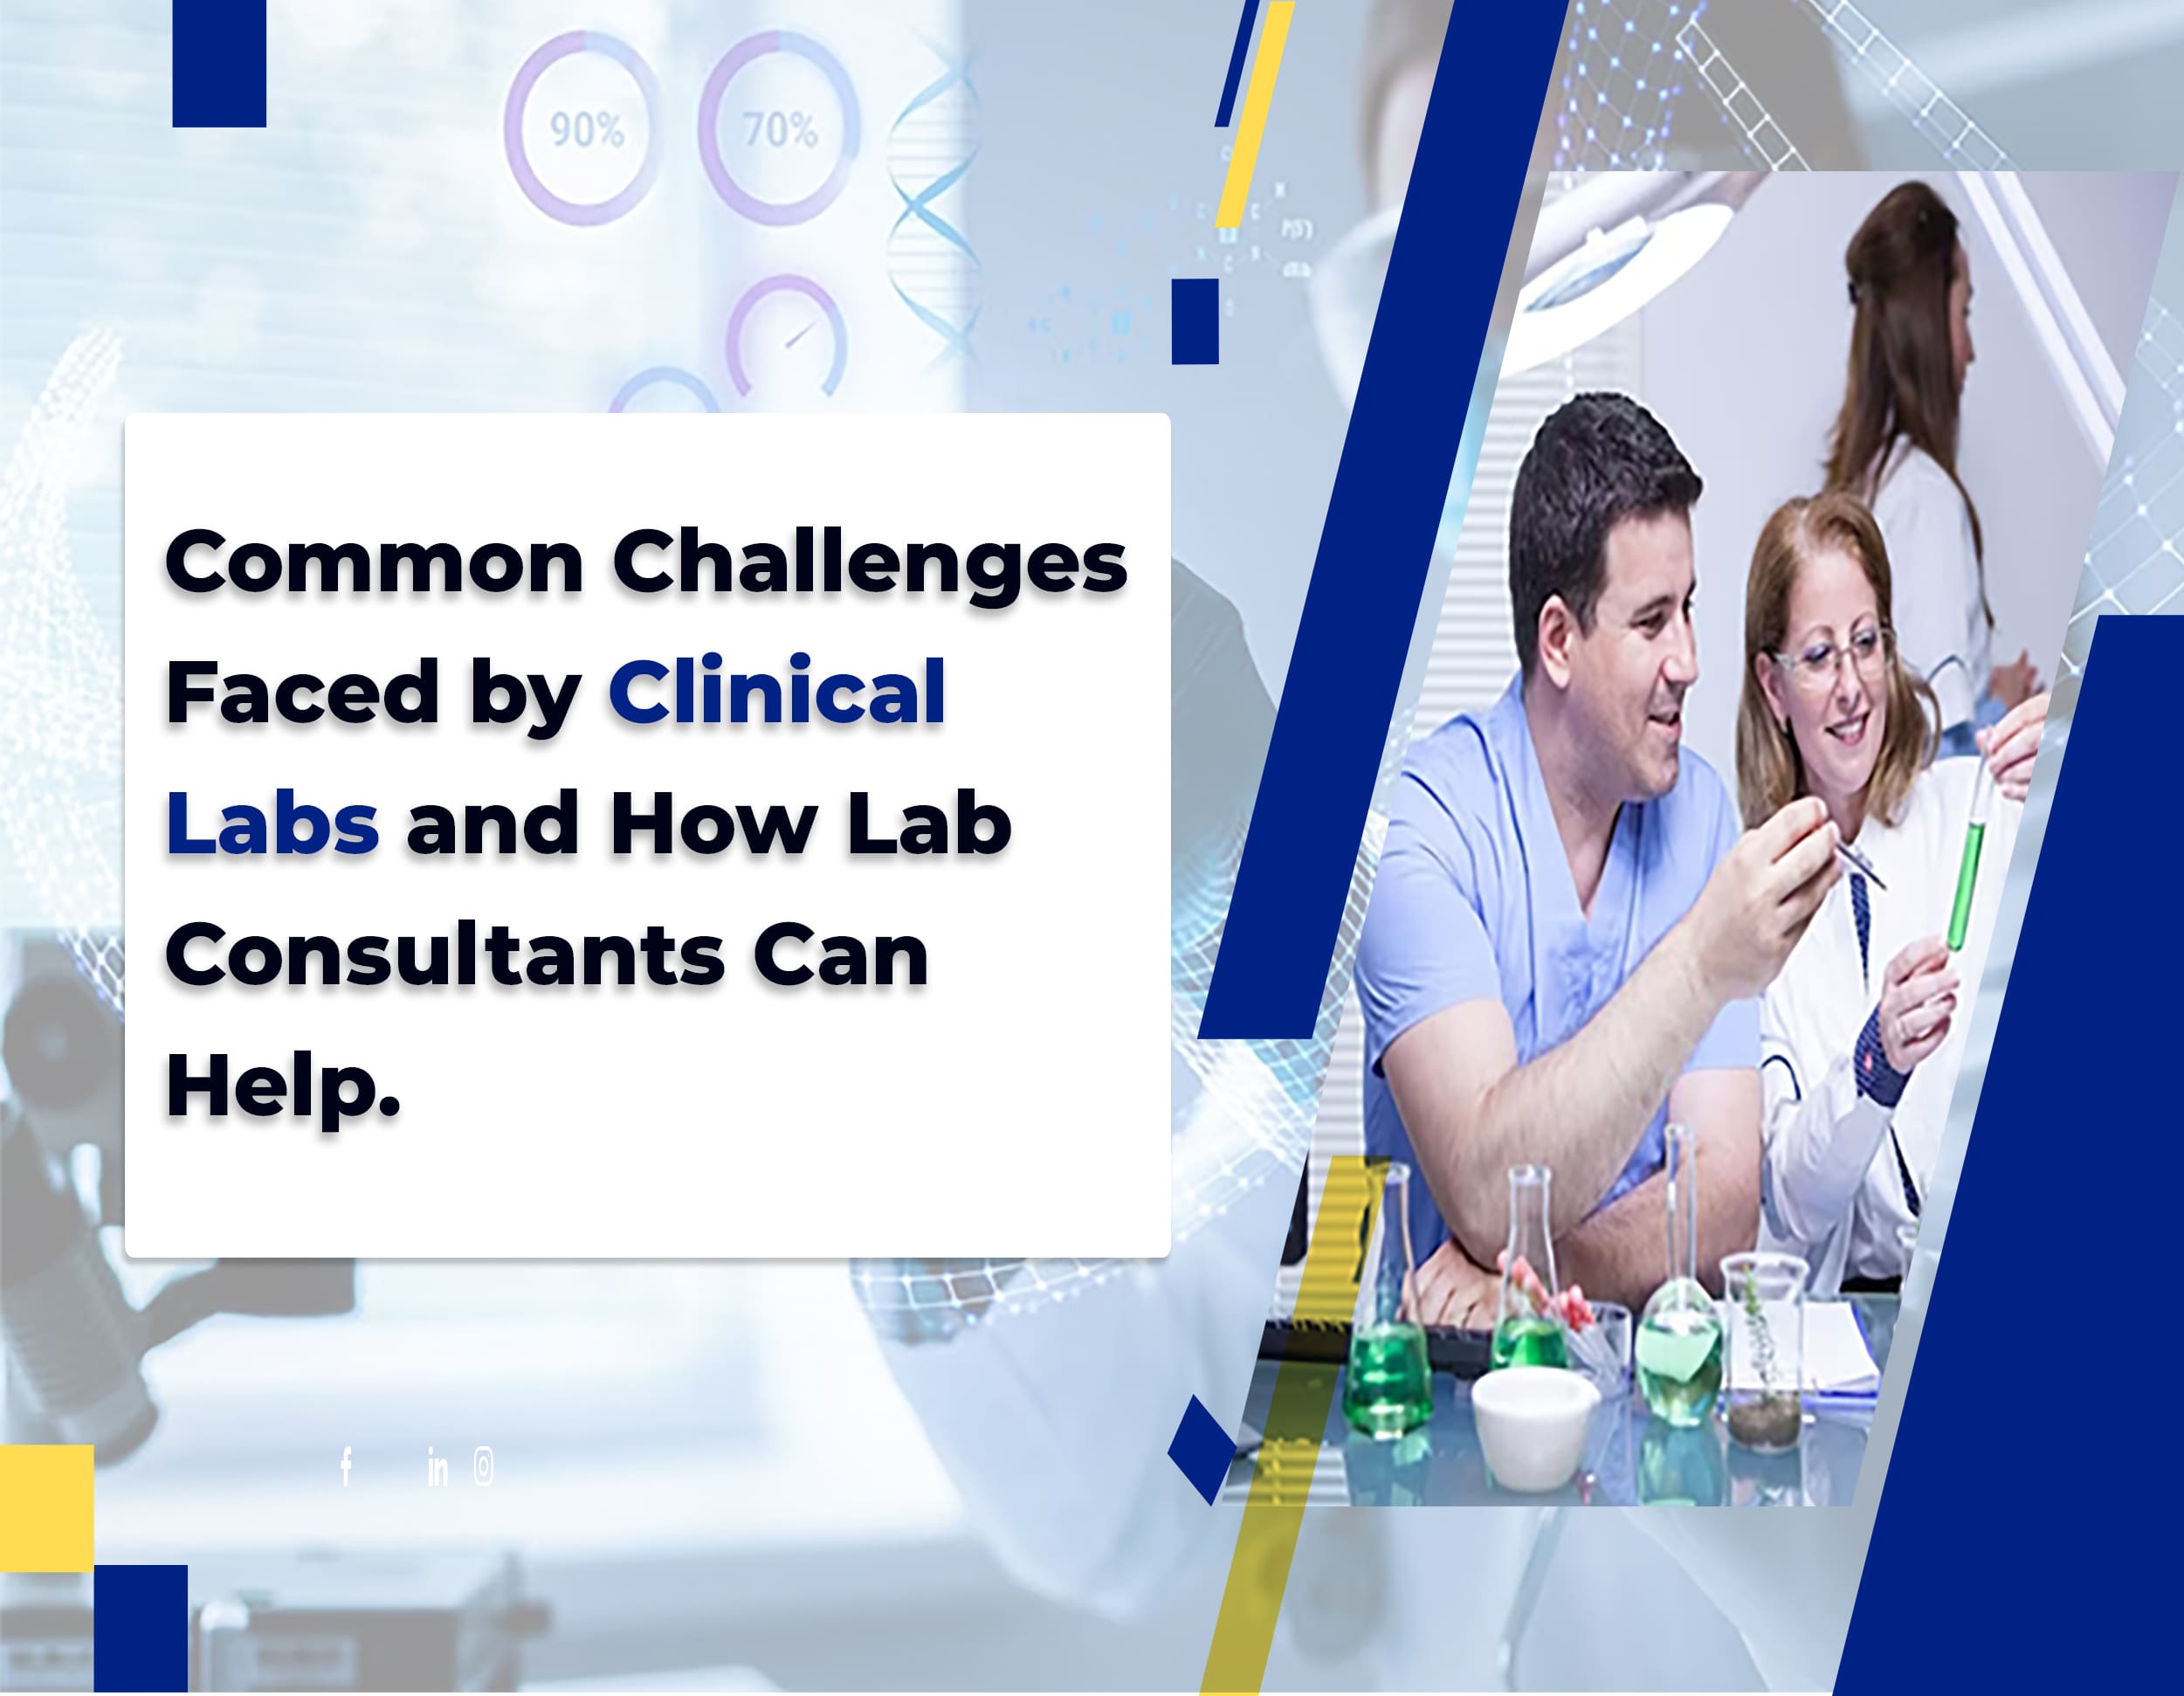 8 Common Challenges Faced by Clinical Labs